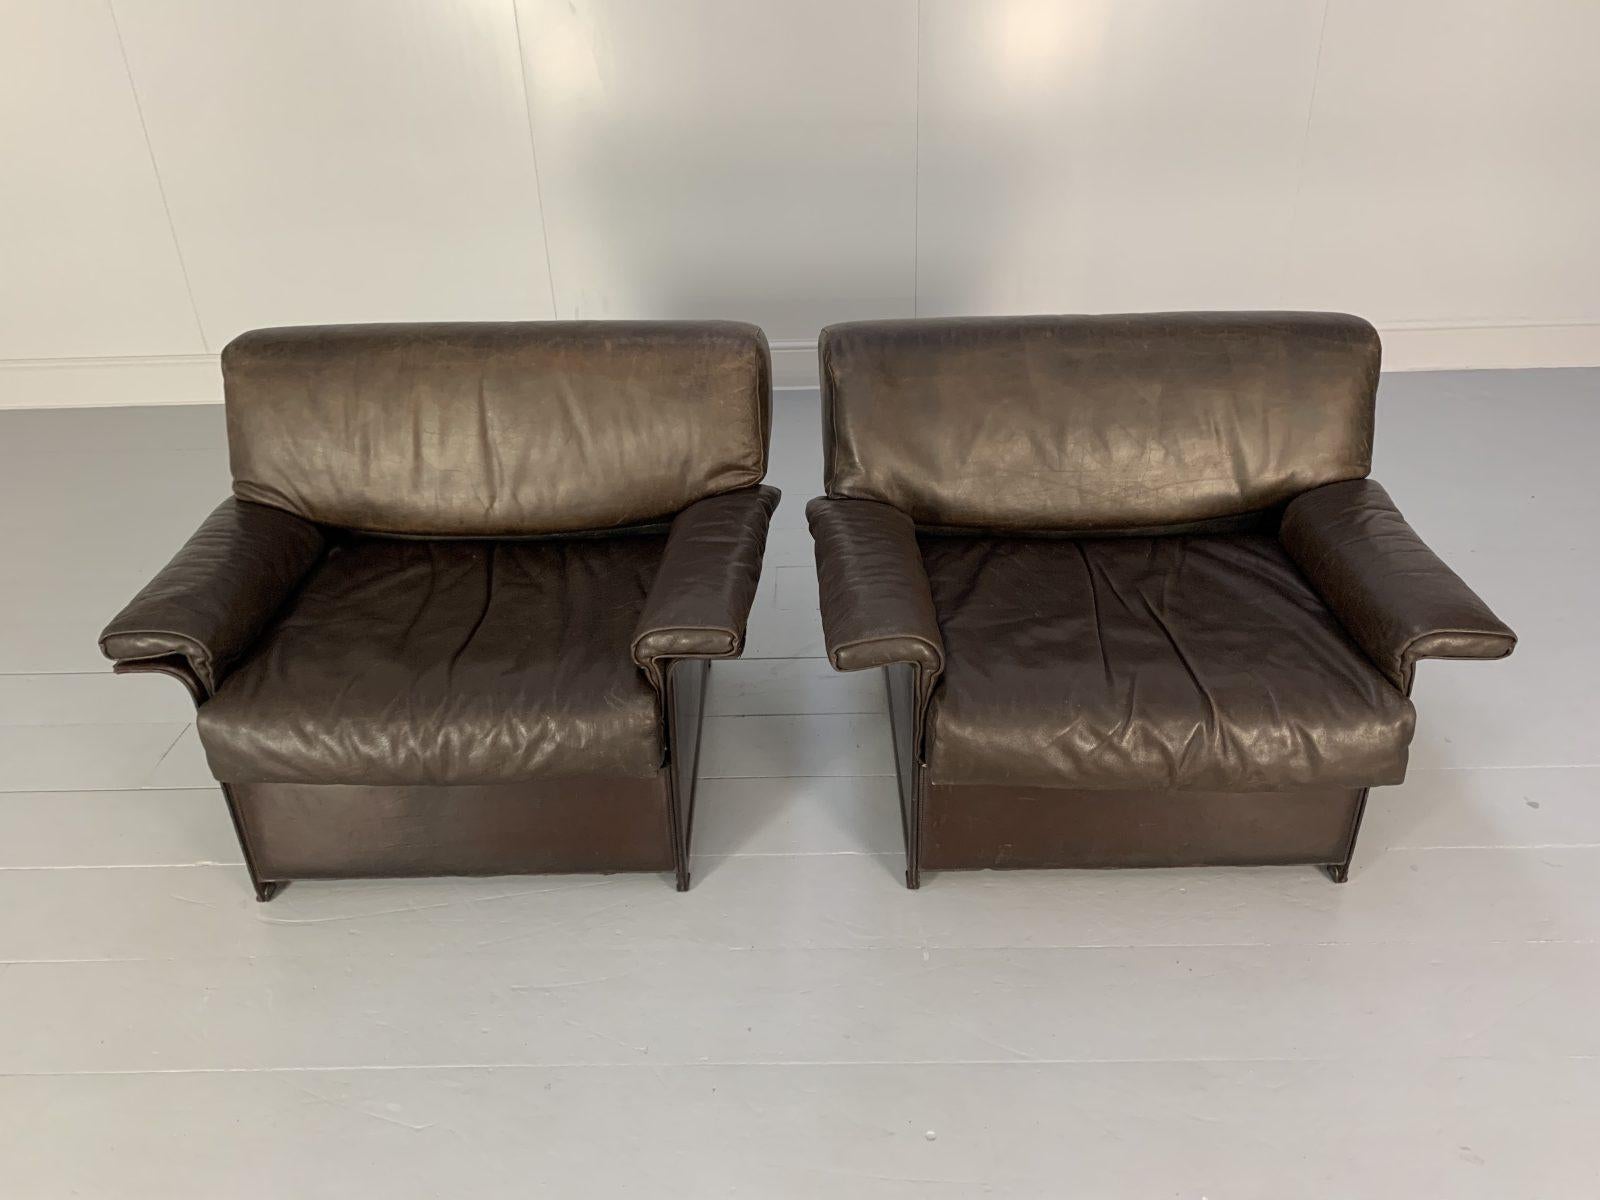 Pair of Matteo Grassi “Tm” Armchairs – in Vintage Brown Leather For Sale 1